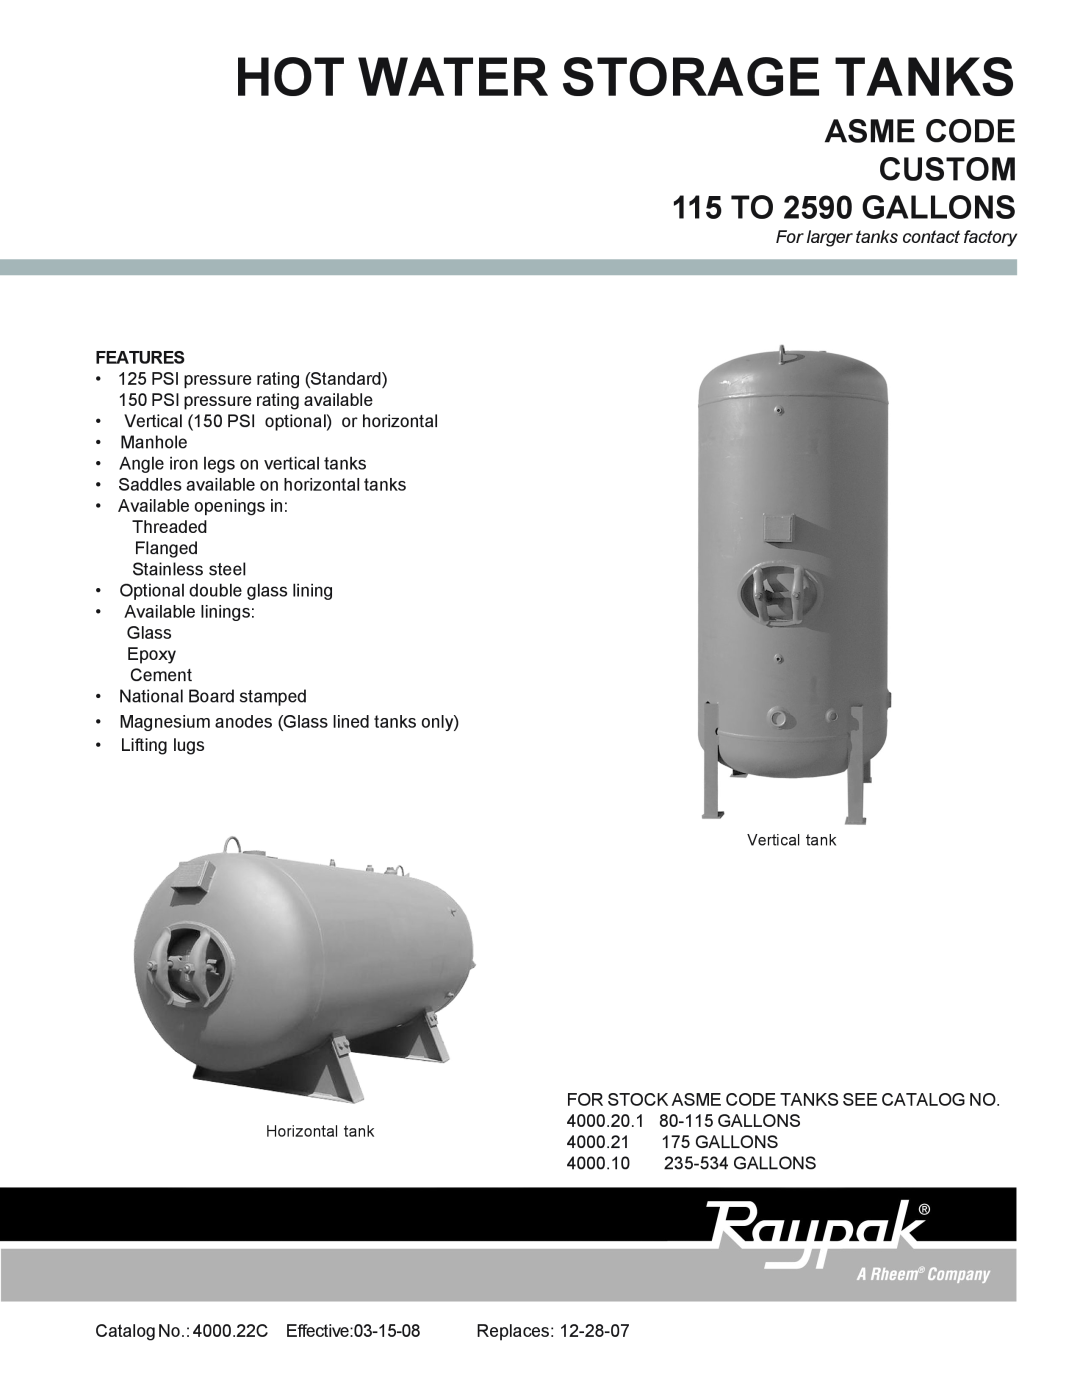 Raypak 115 To 2590 Gallons manual ASME CODE CUSTOM 115 TO 2590 GALLONS, Hot Water Storage Tanks, Features 